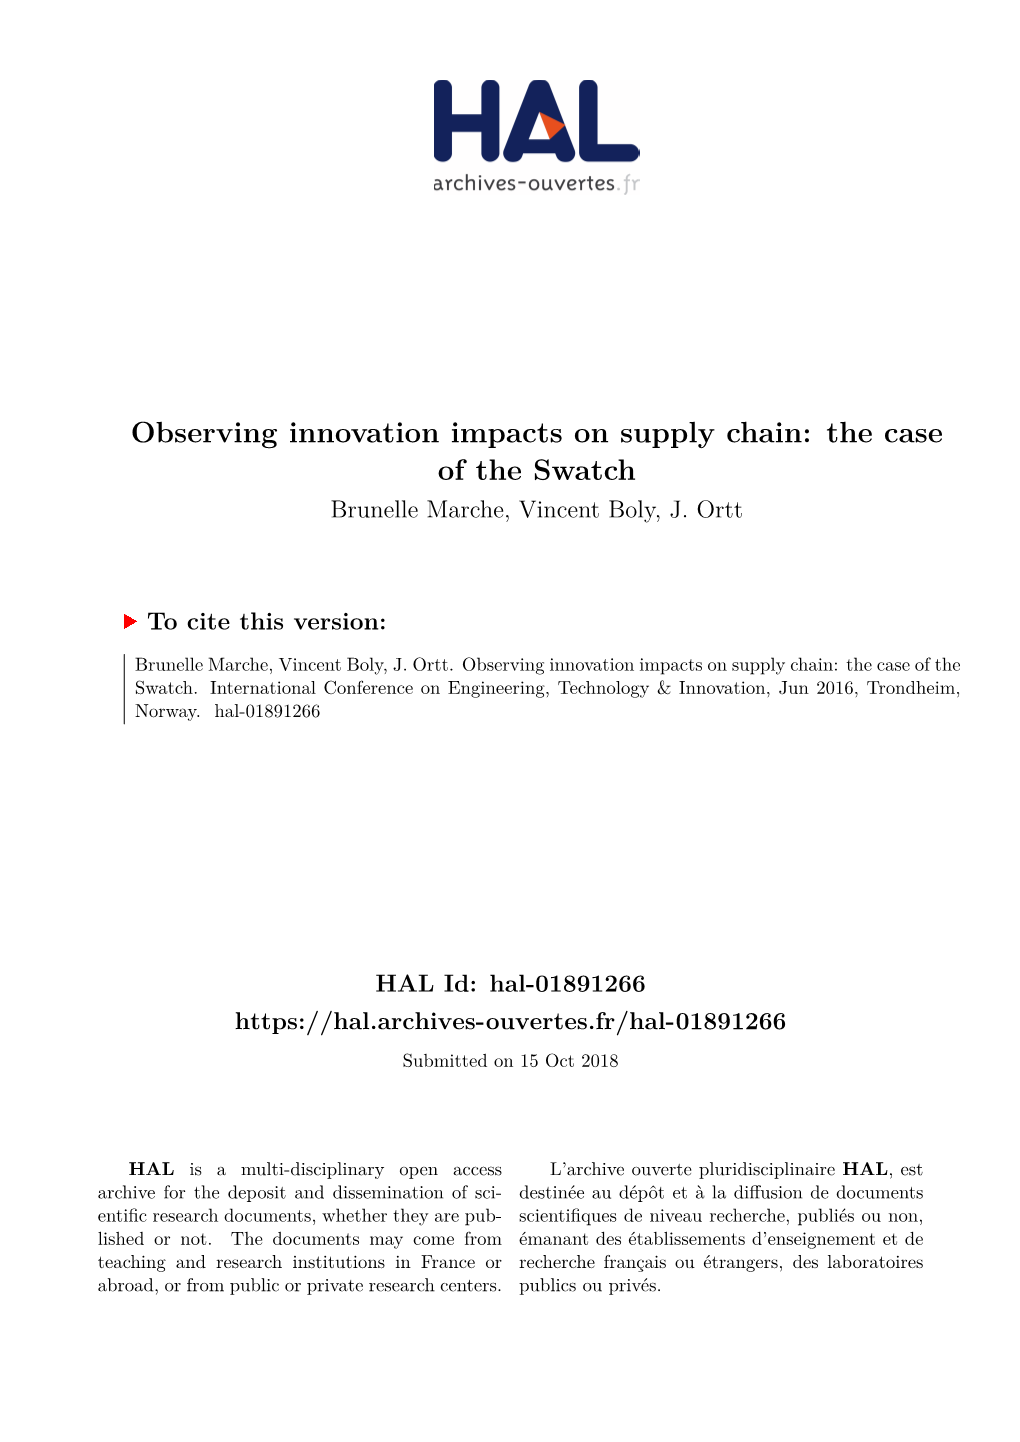 Observing Innovation Impacts on Supply Chain: the Case of the Swatch Brunelle Marche, Vincent Boly, J